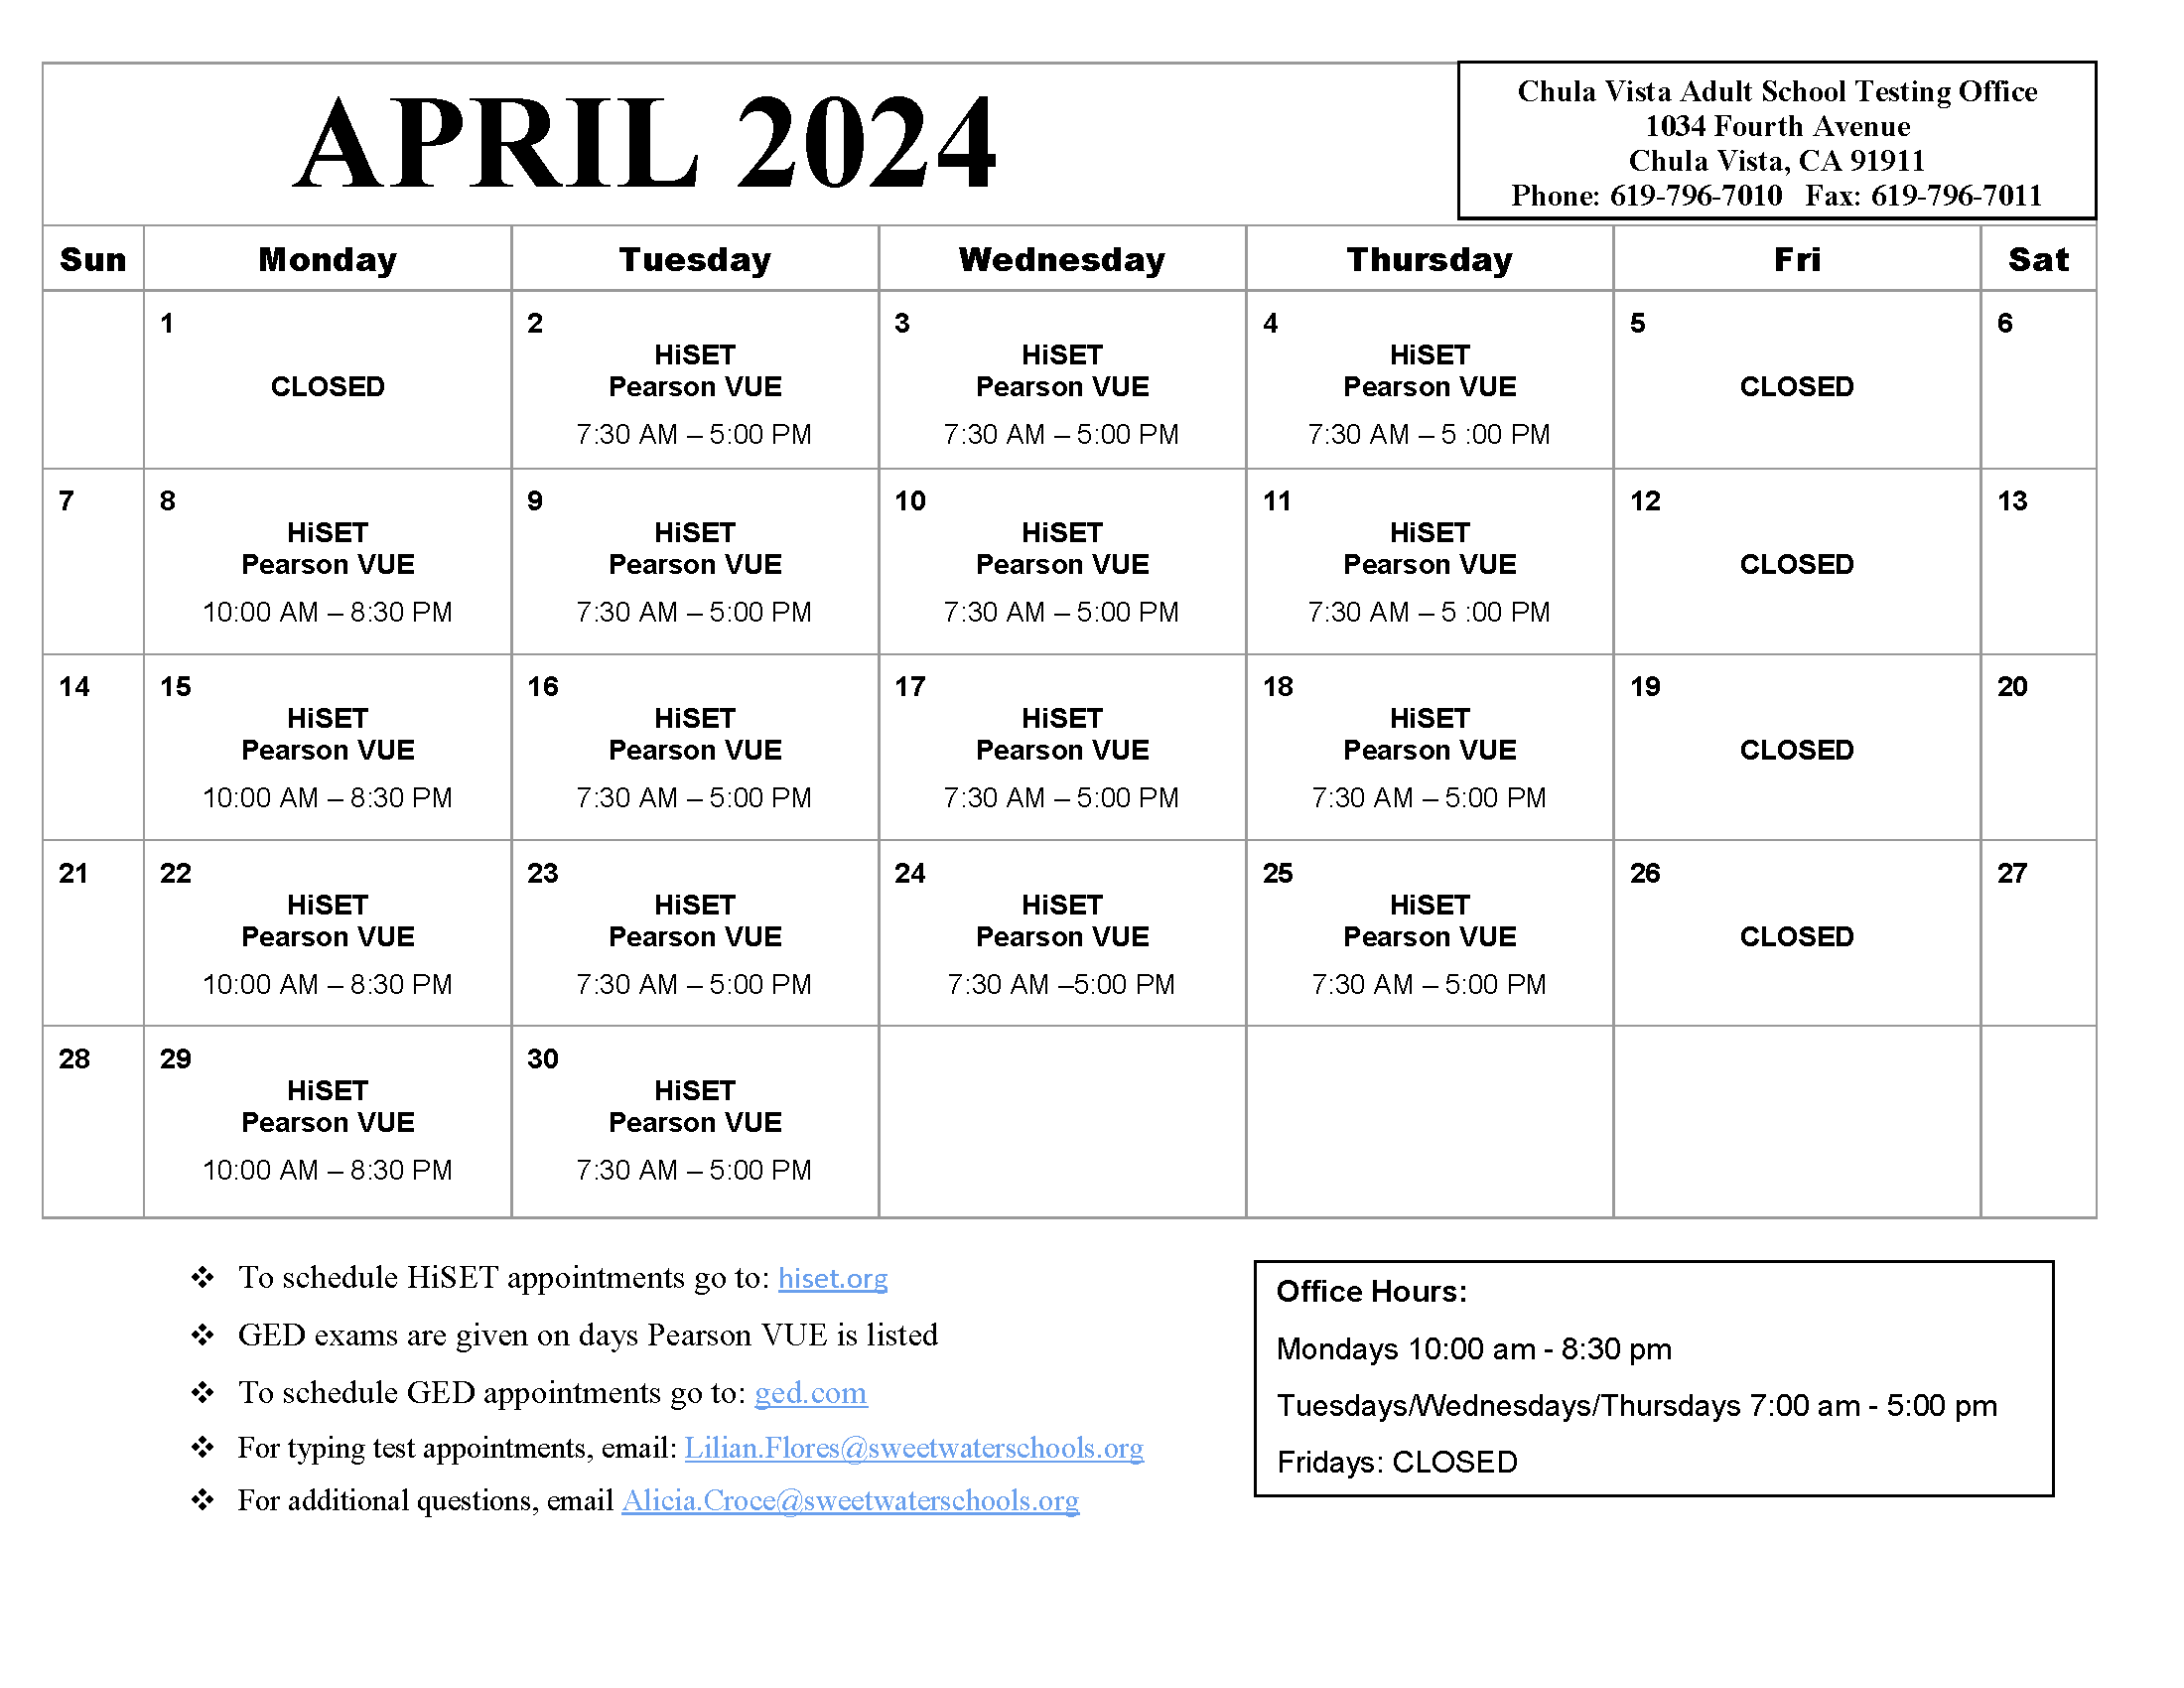 Chula Vista Testing Calendar for April 2024 with times and days they are open.